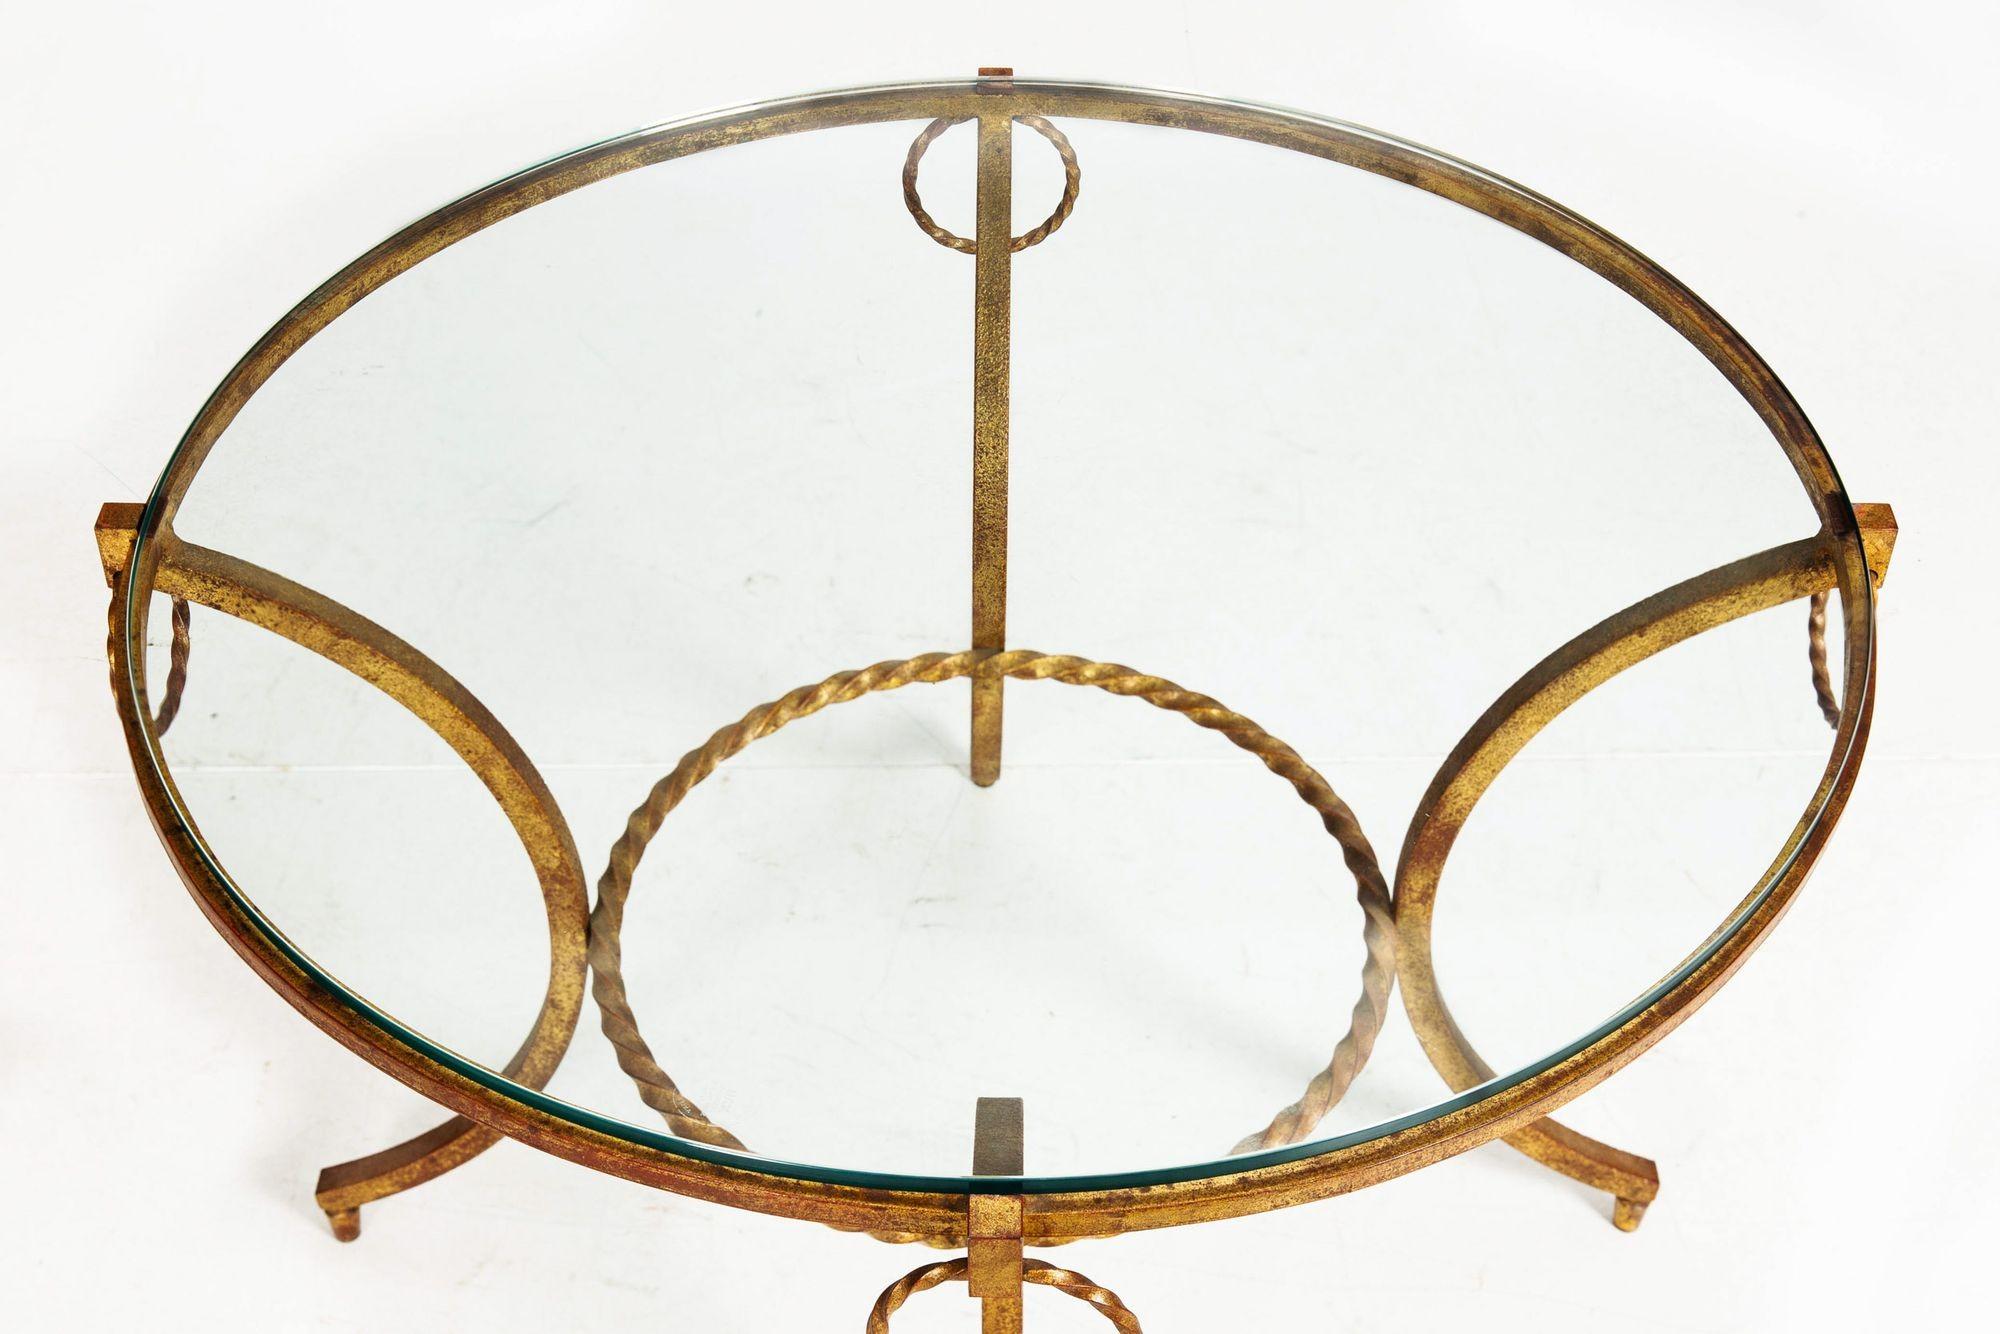 French Modernist Gilded Wrought-Iron & Glass Coffee Accent Table ca. 1950s For Sale 1